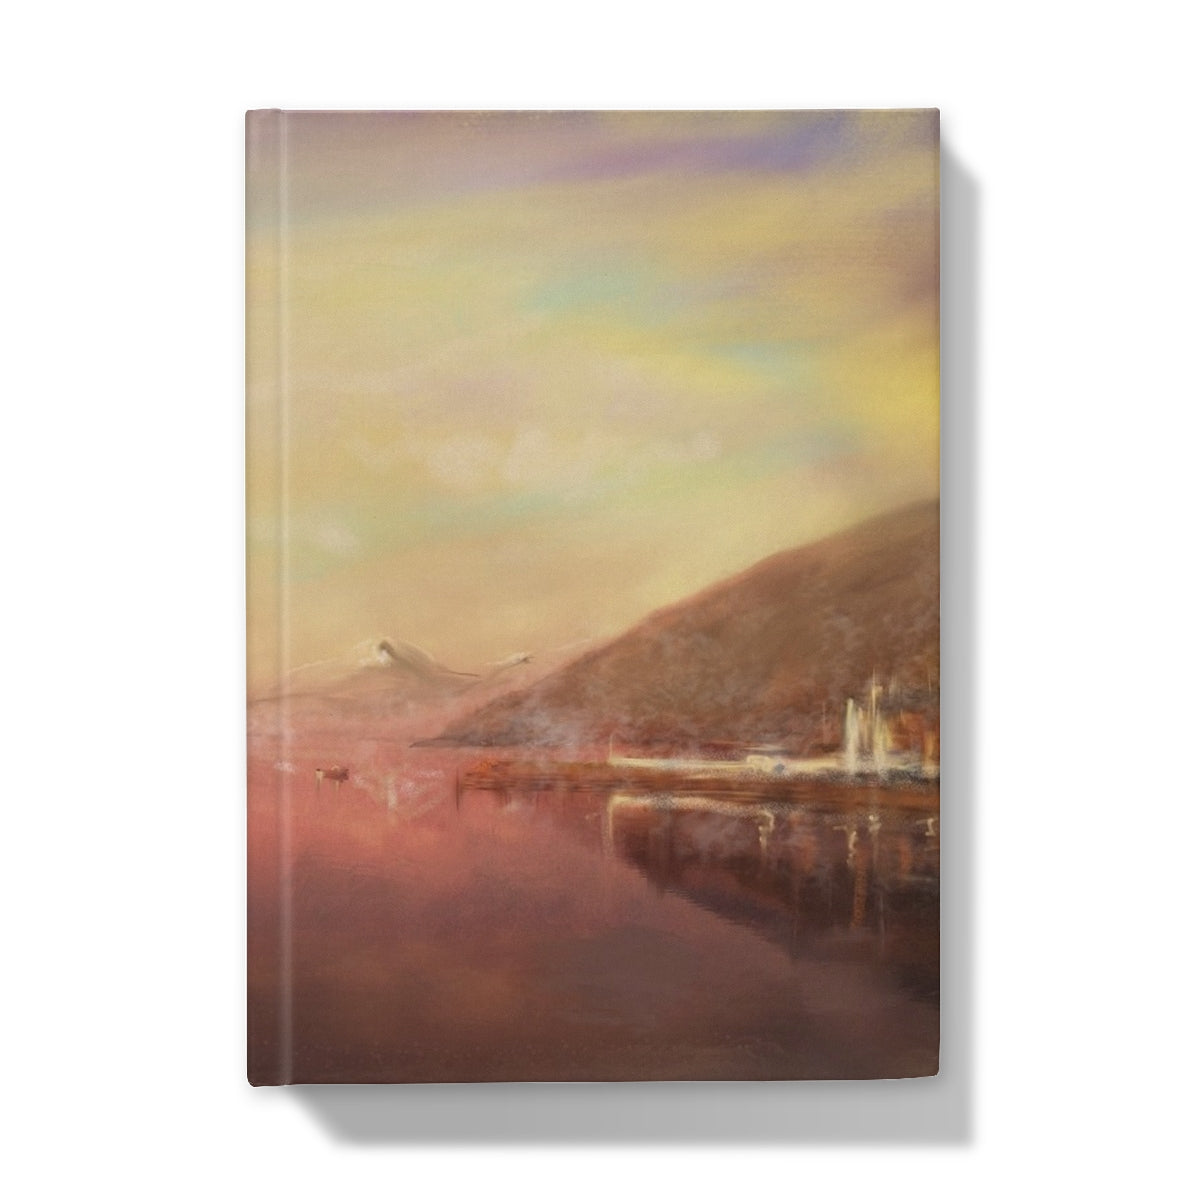 Loch Tay Art Gifts Hardback Journal-Journals & Notebooks-Scottish Lochs & Mountains Art Gallery-5"x7"-Lined-Paintings, Prints, Homeware, Art Gifts From Scotland By Scottish Artist Kevin Hunter